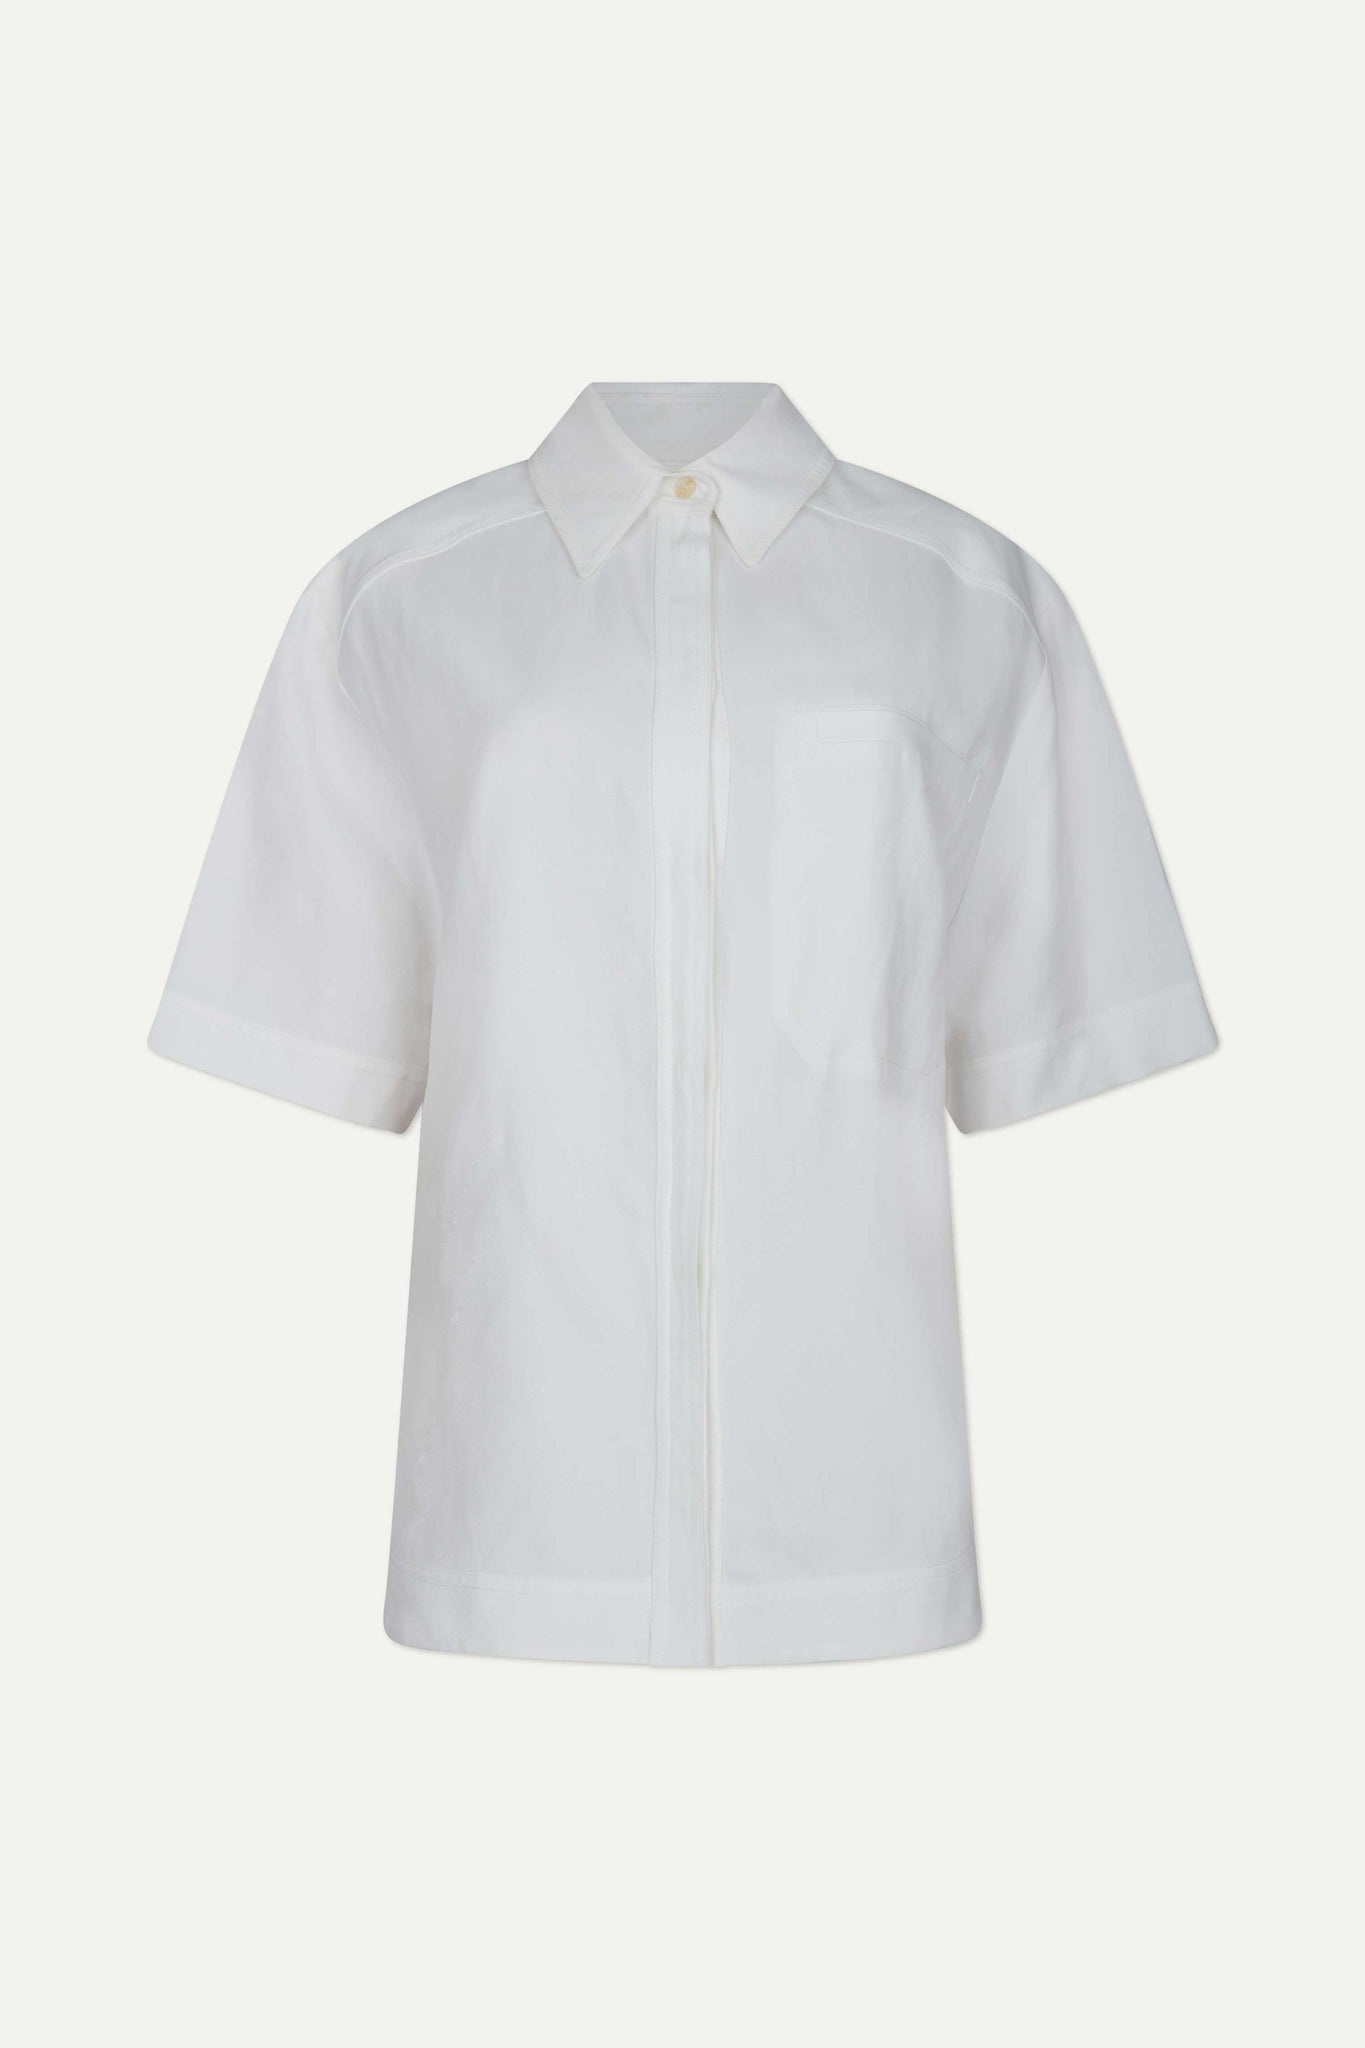 MOHELI SHIRT BY LOULOU STUDIO IN IVORY